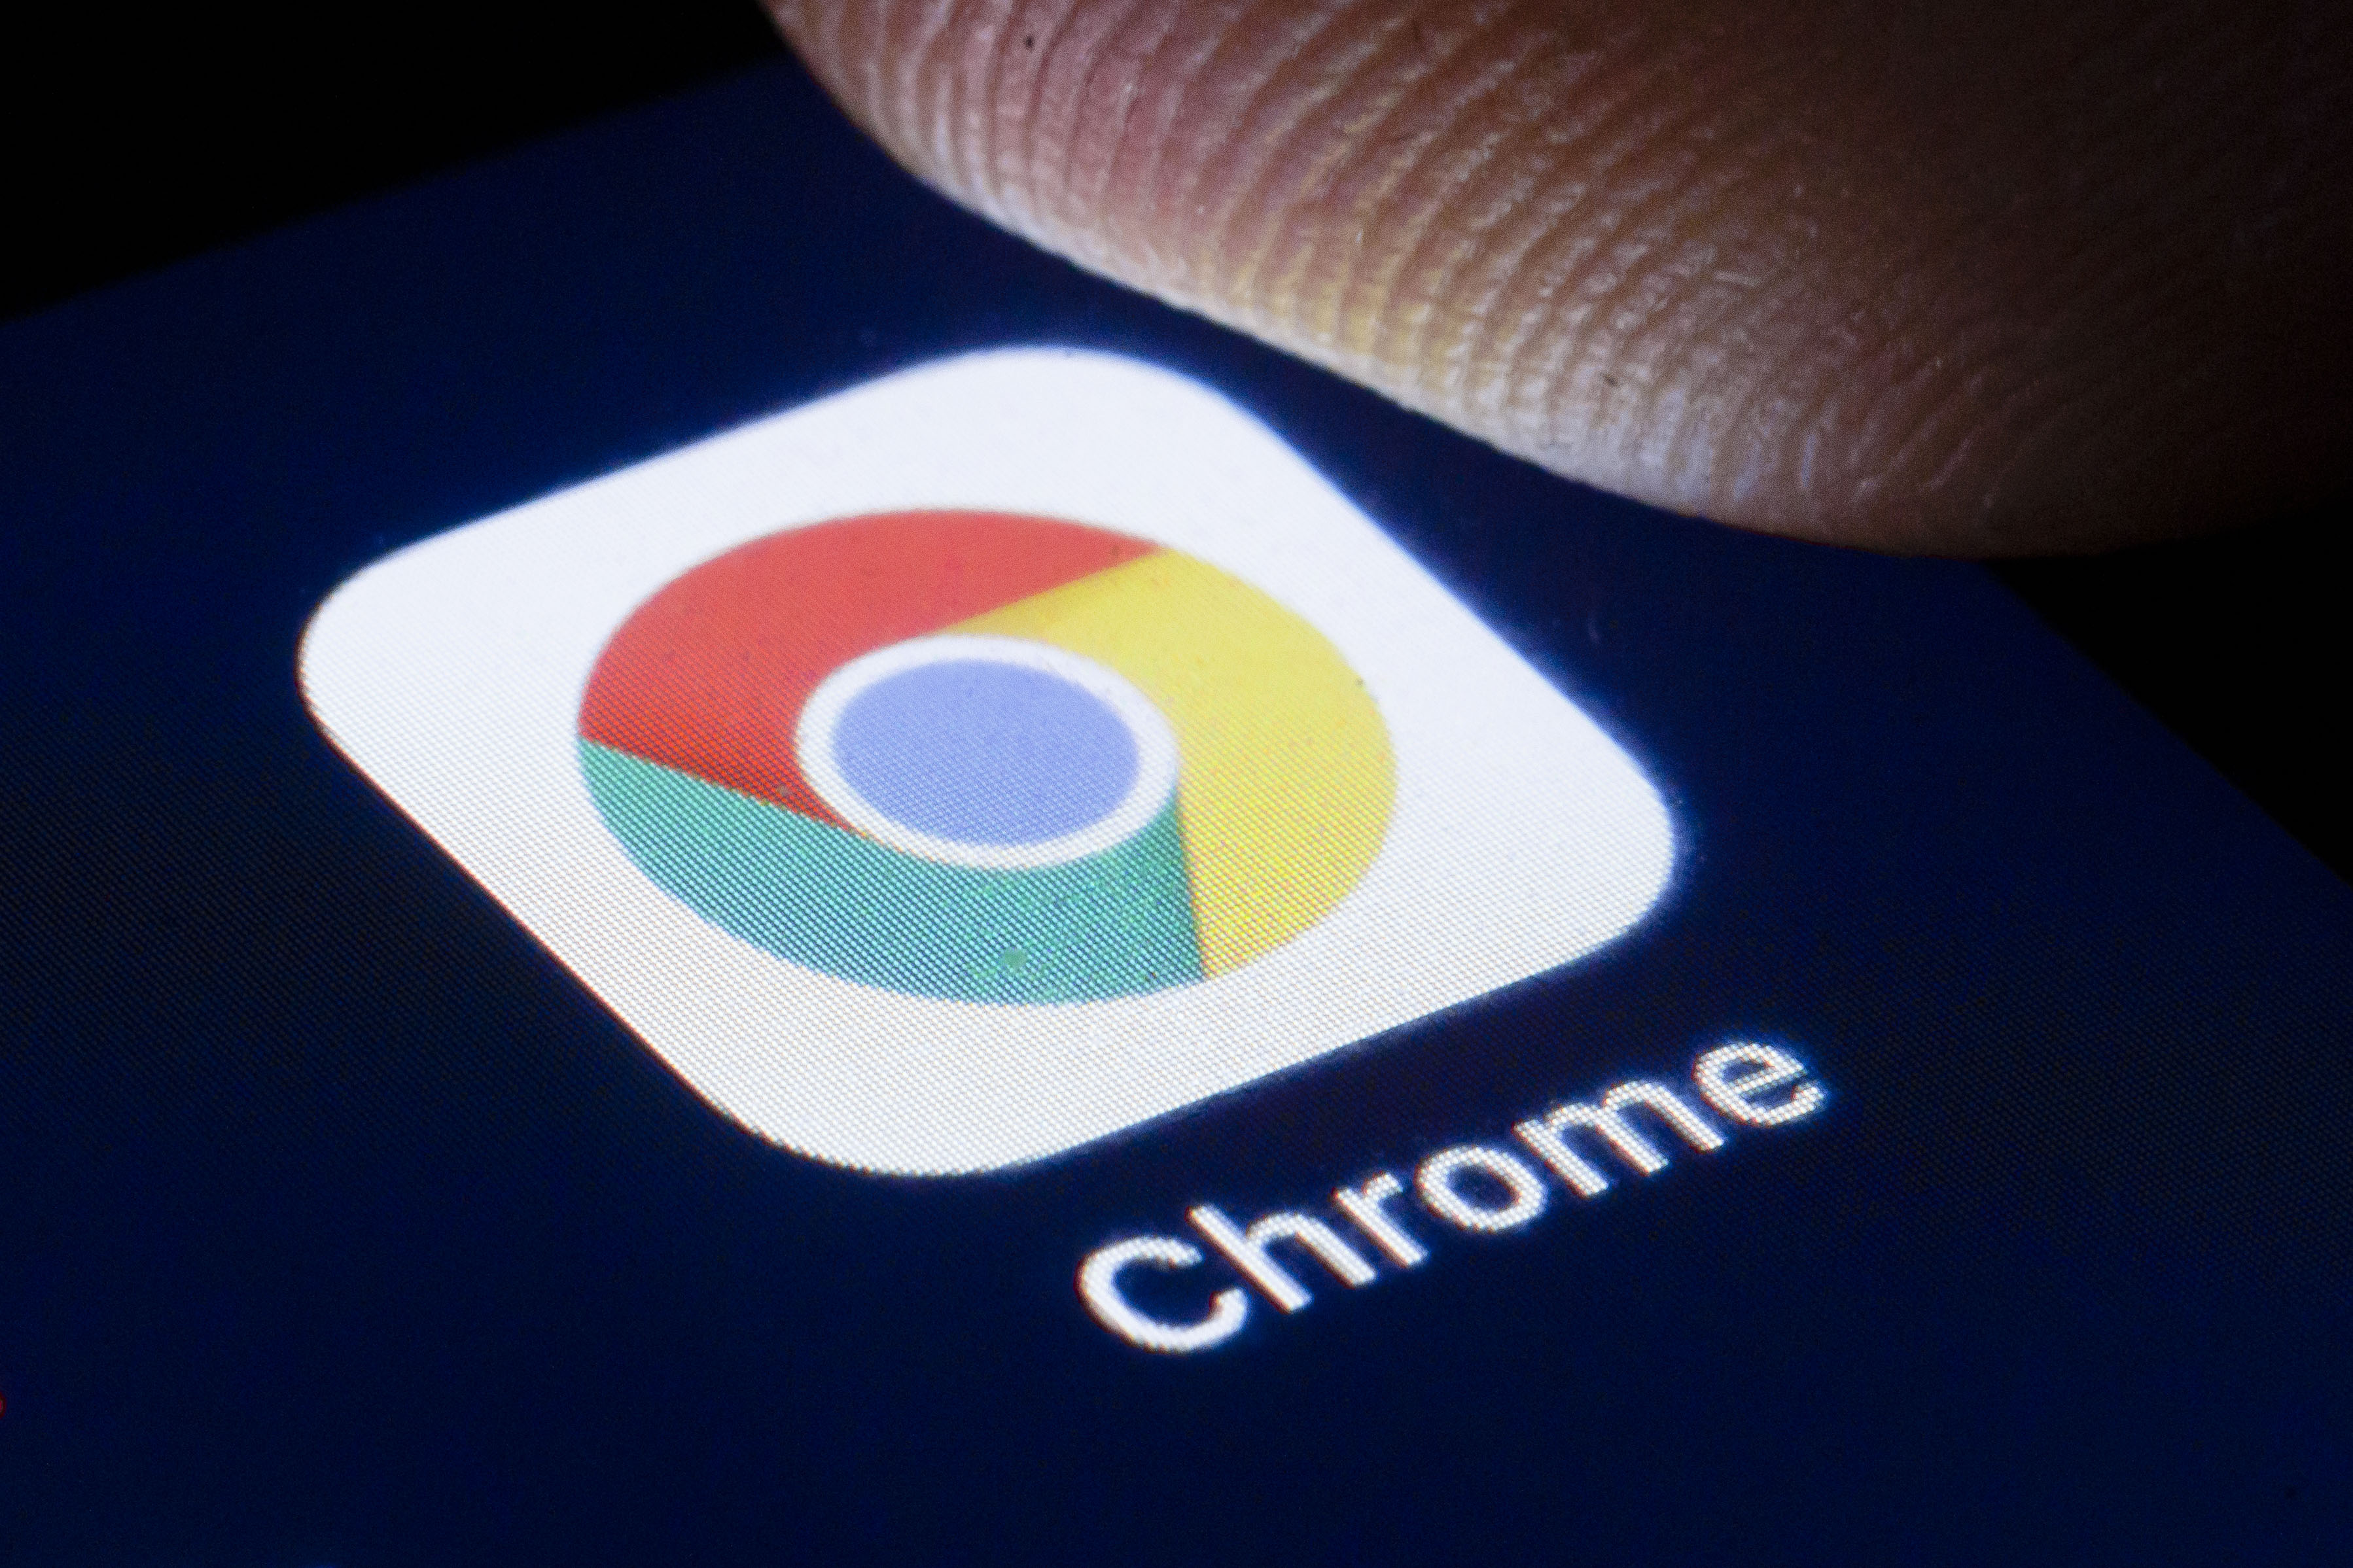 Chrome will now silence many of those annoying notification permission prompts on the web